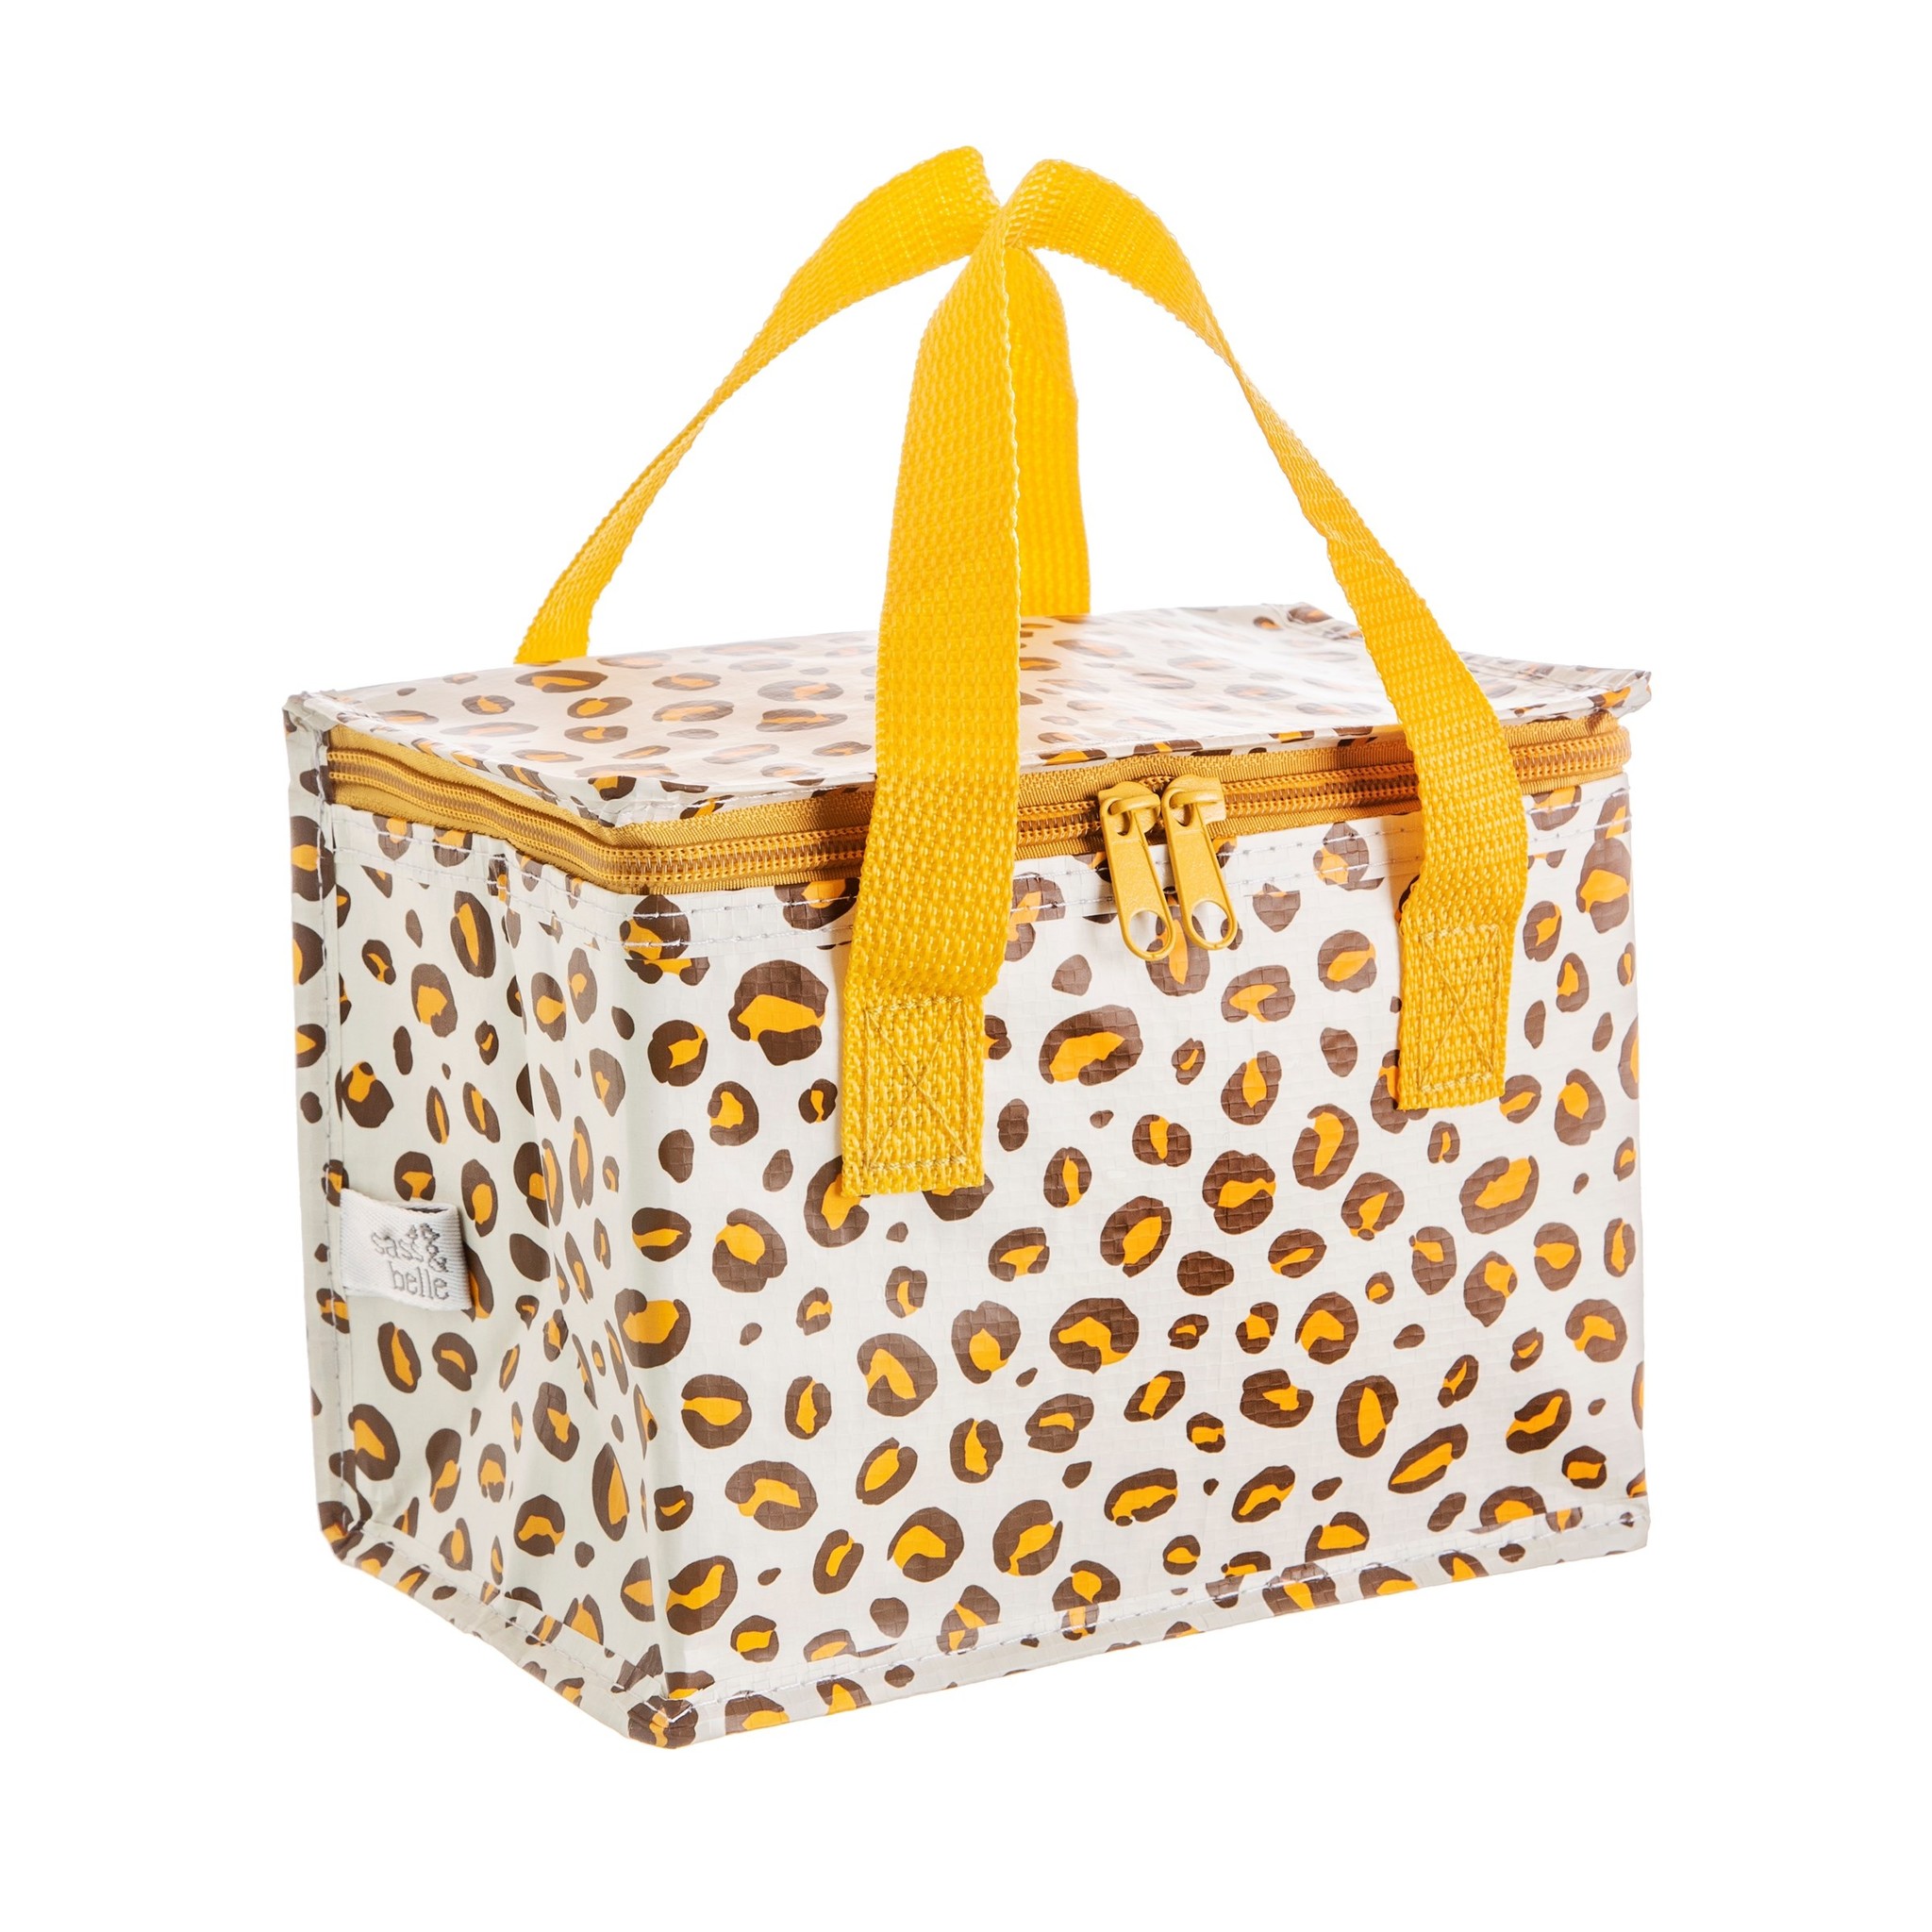 discretie Consulaat stroomkring Thermo lunch tasje "Leopard Love" | Sass & Belle - JoMilly Vintage